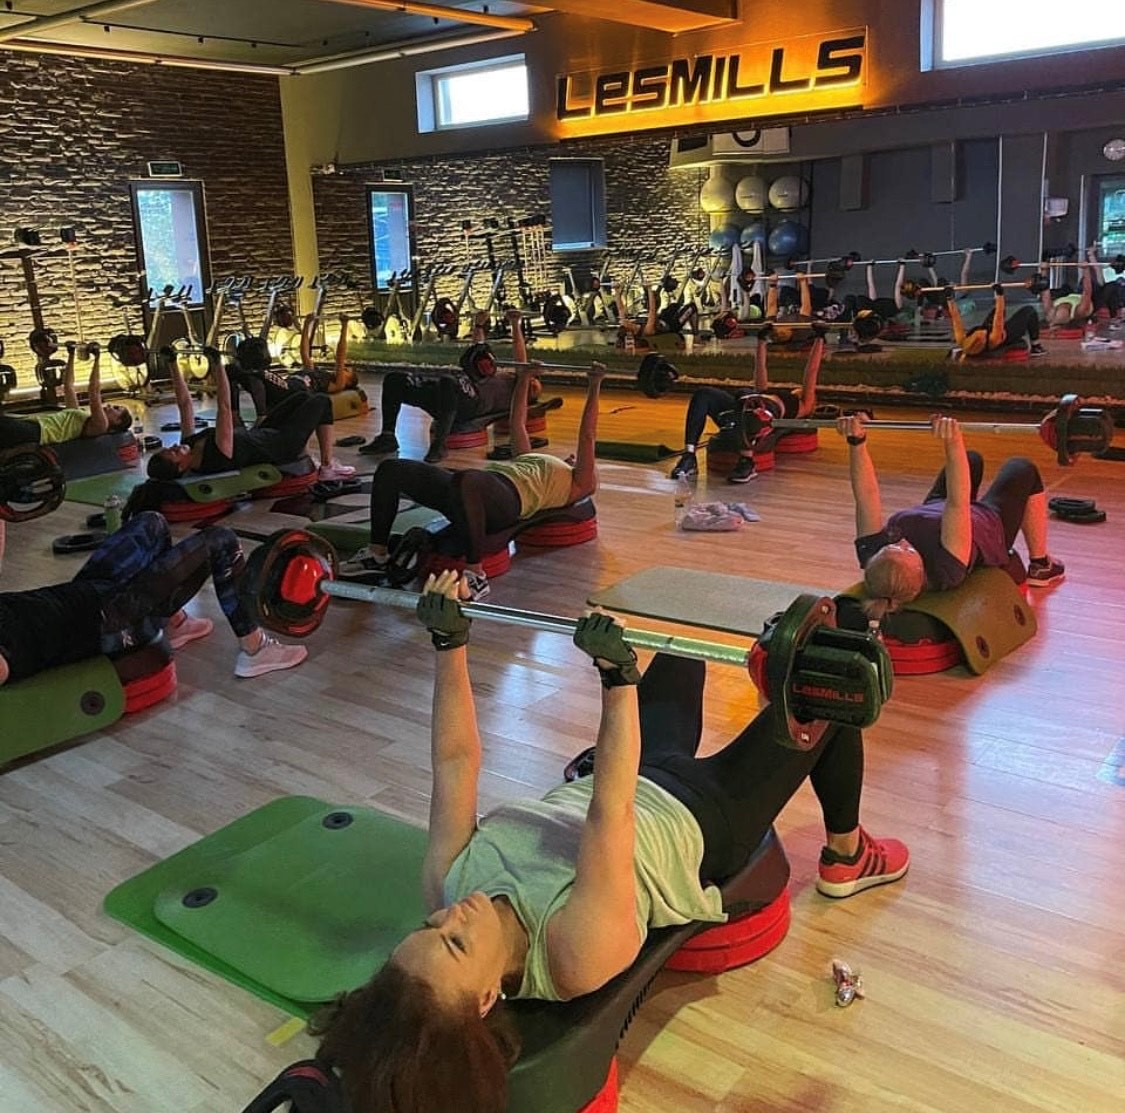 BODYPUMP in the group fitness studio